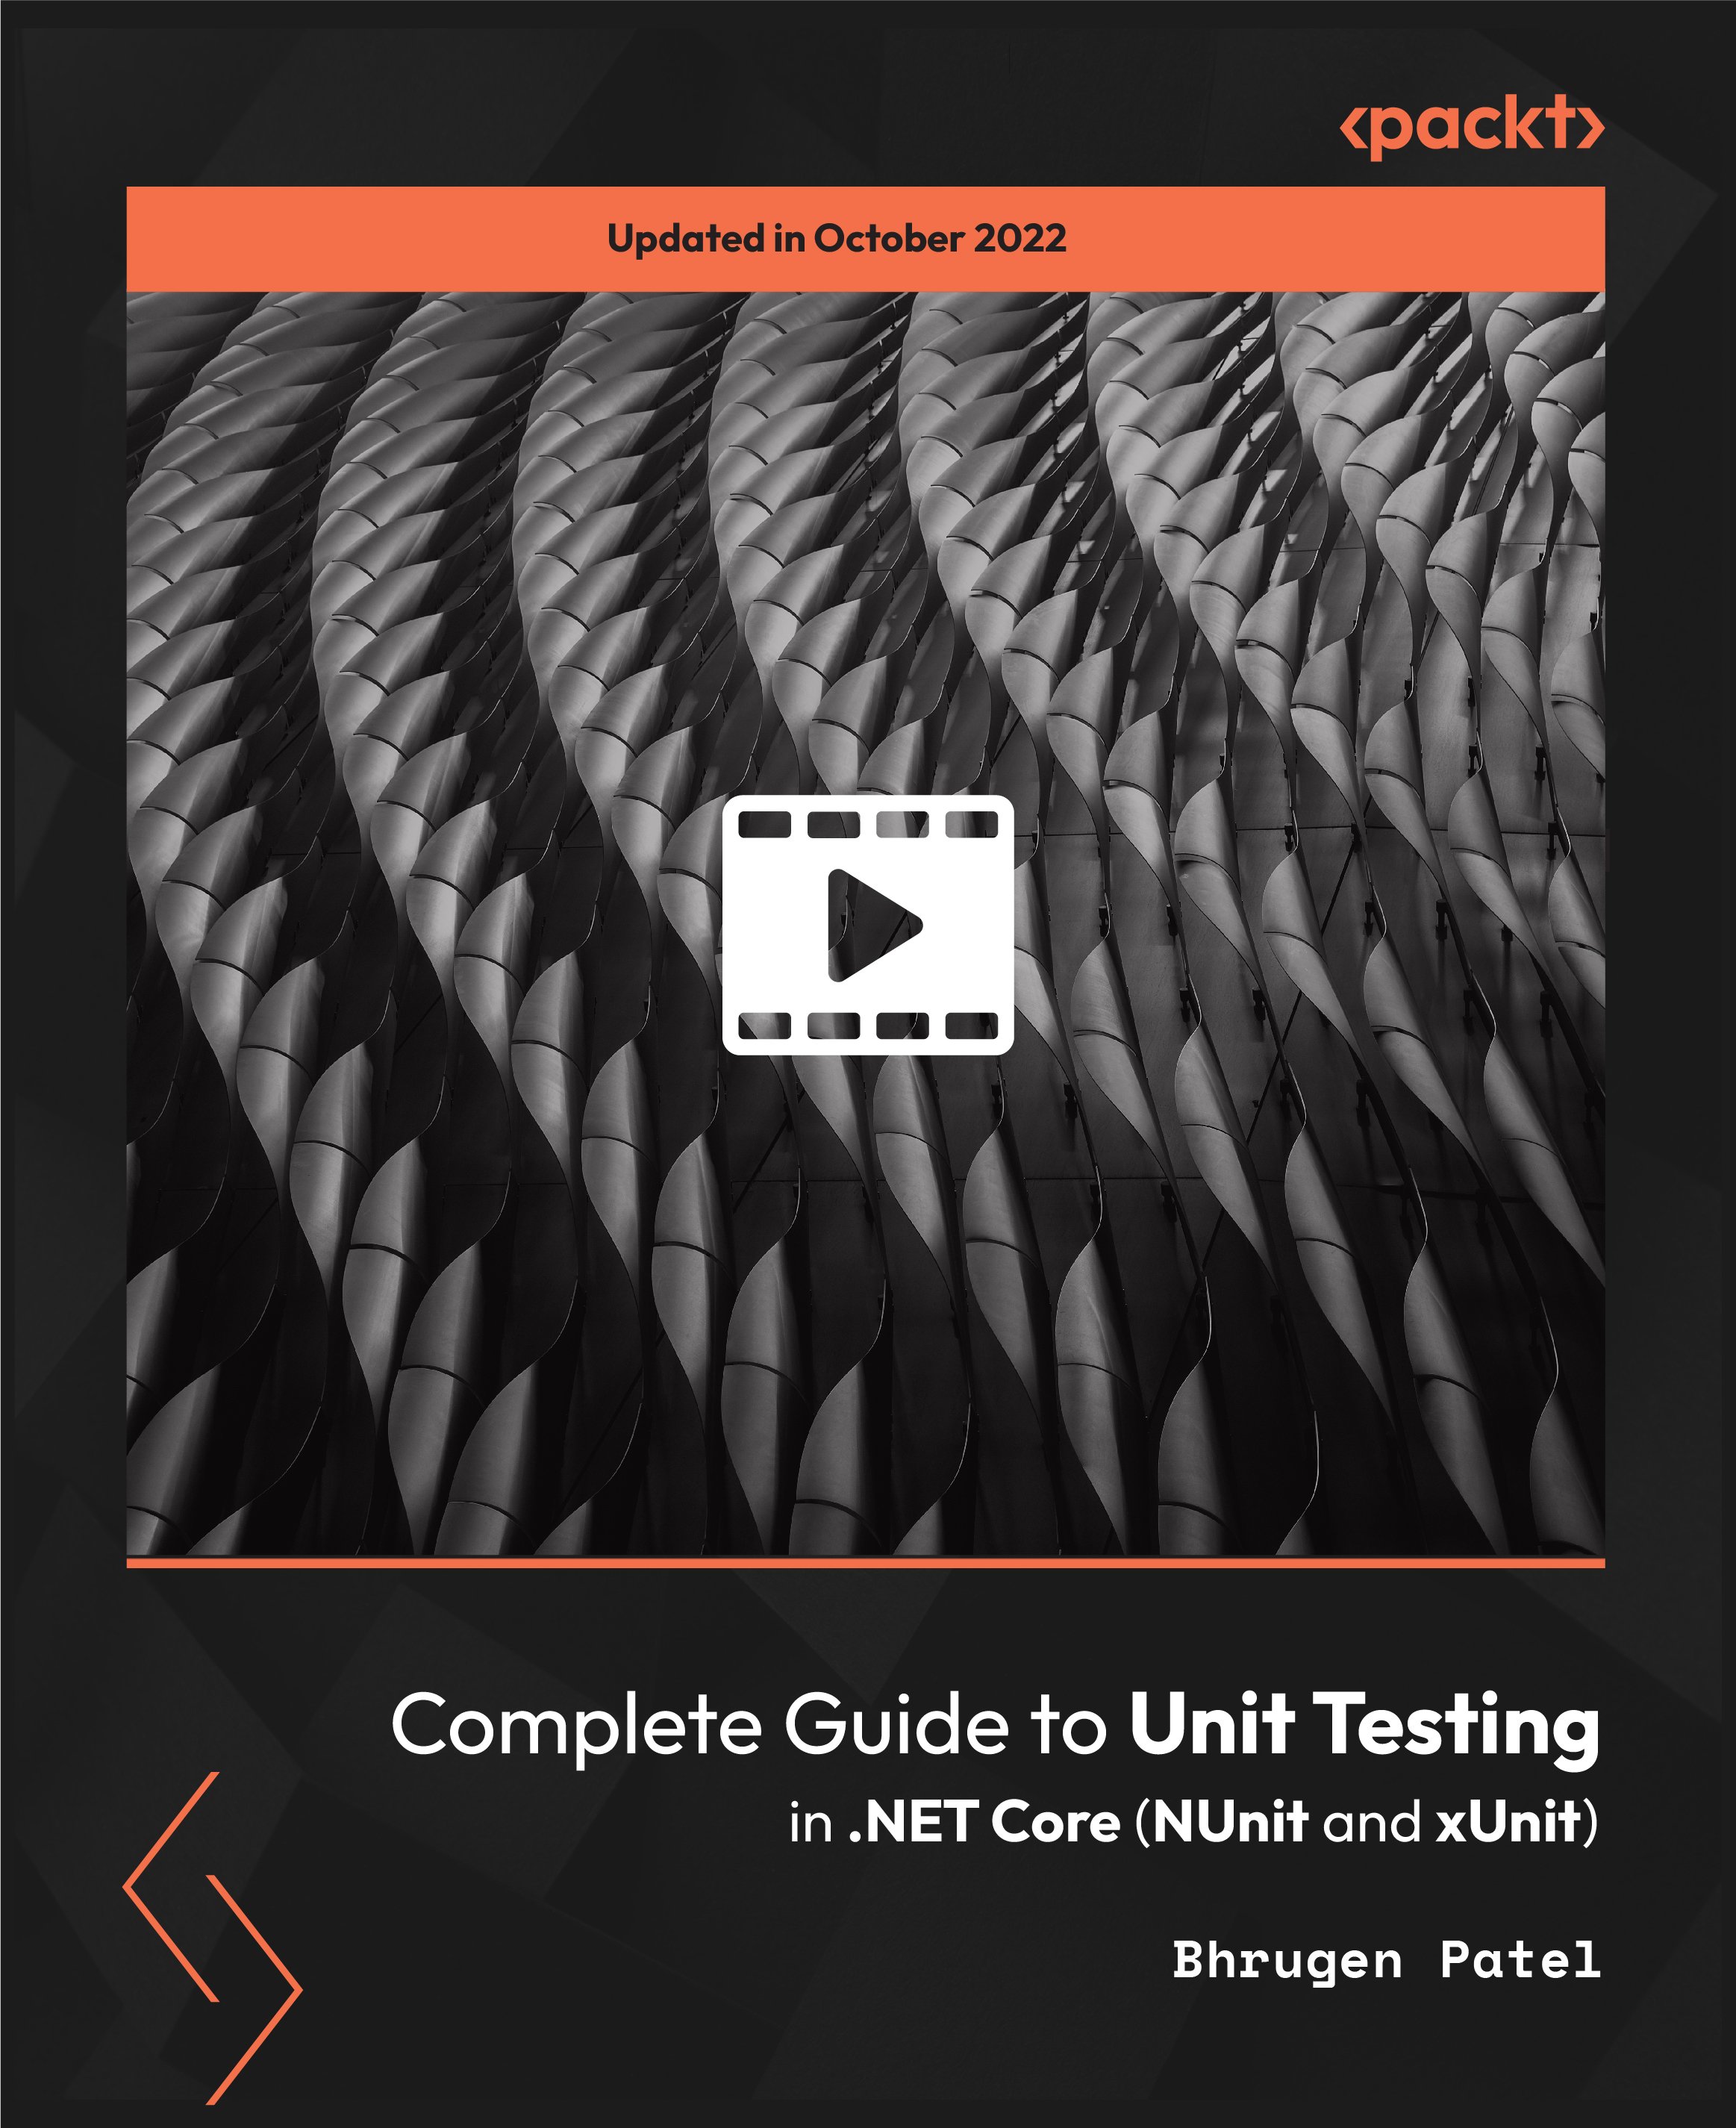 Complete Guide to Unit Testing in .NET Core (NUnit and xUnit)